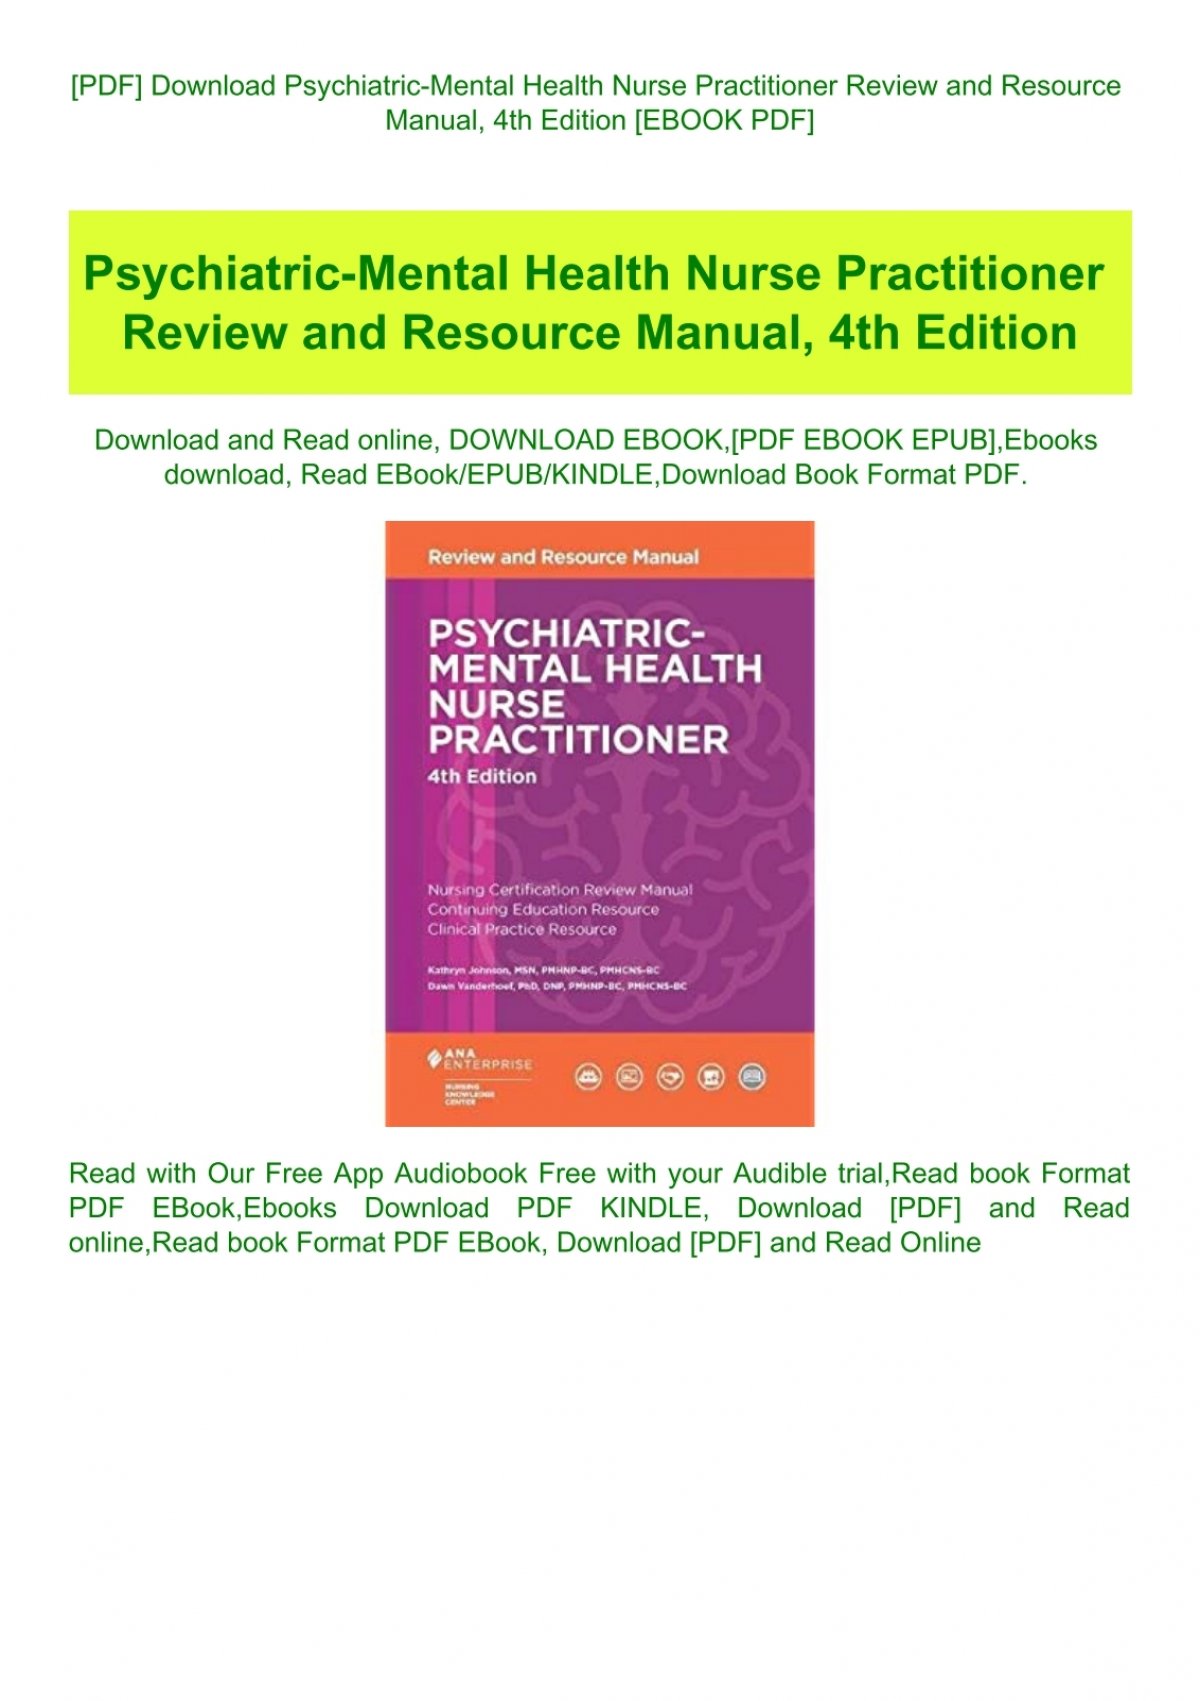 [PDF] Download Psychiatric-Mental Health Nurse Practitioner Review and ...